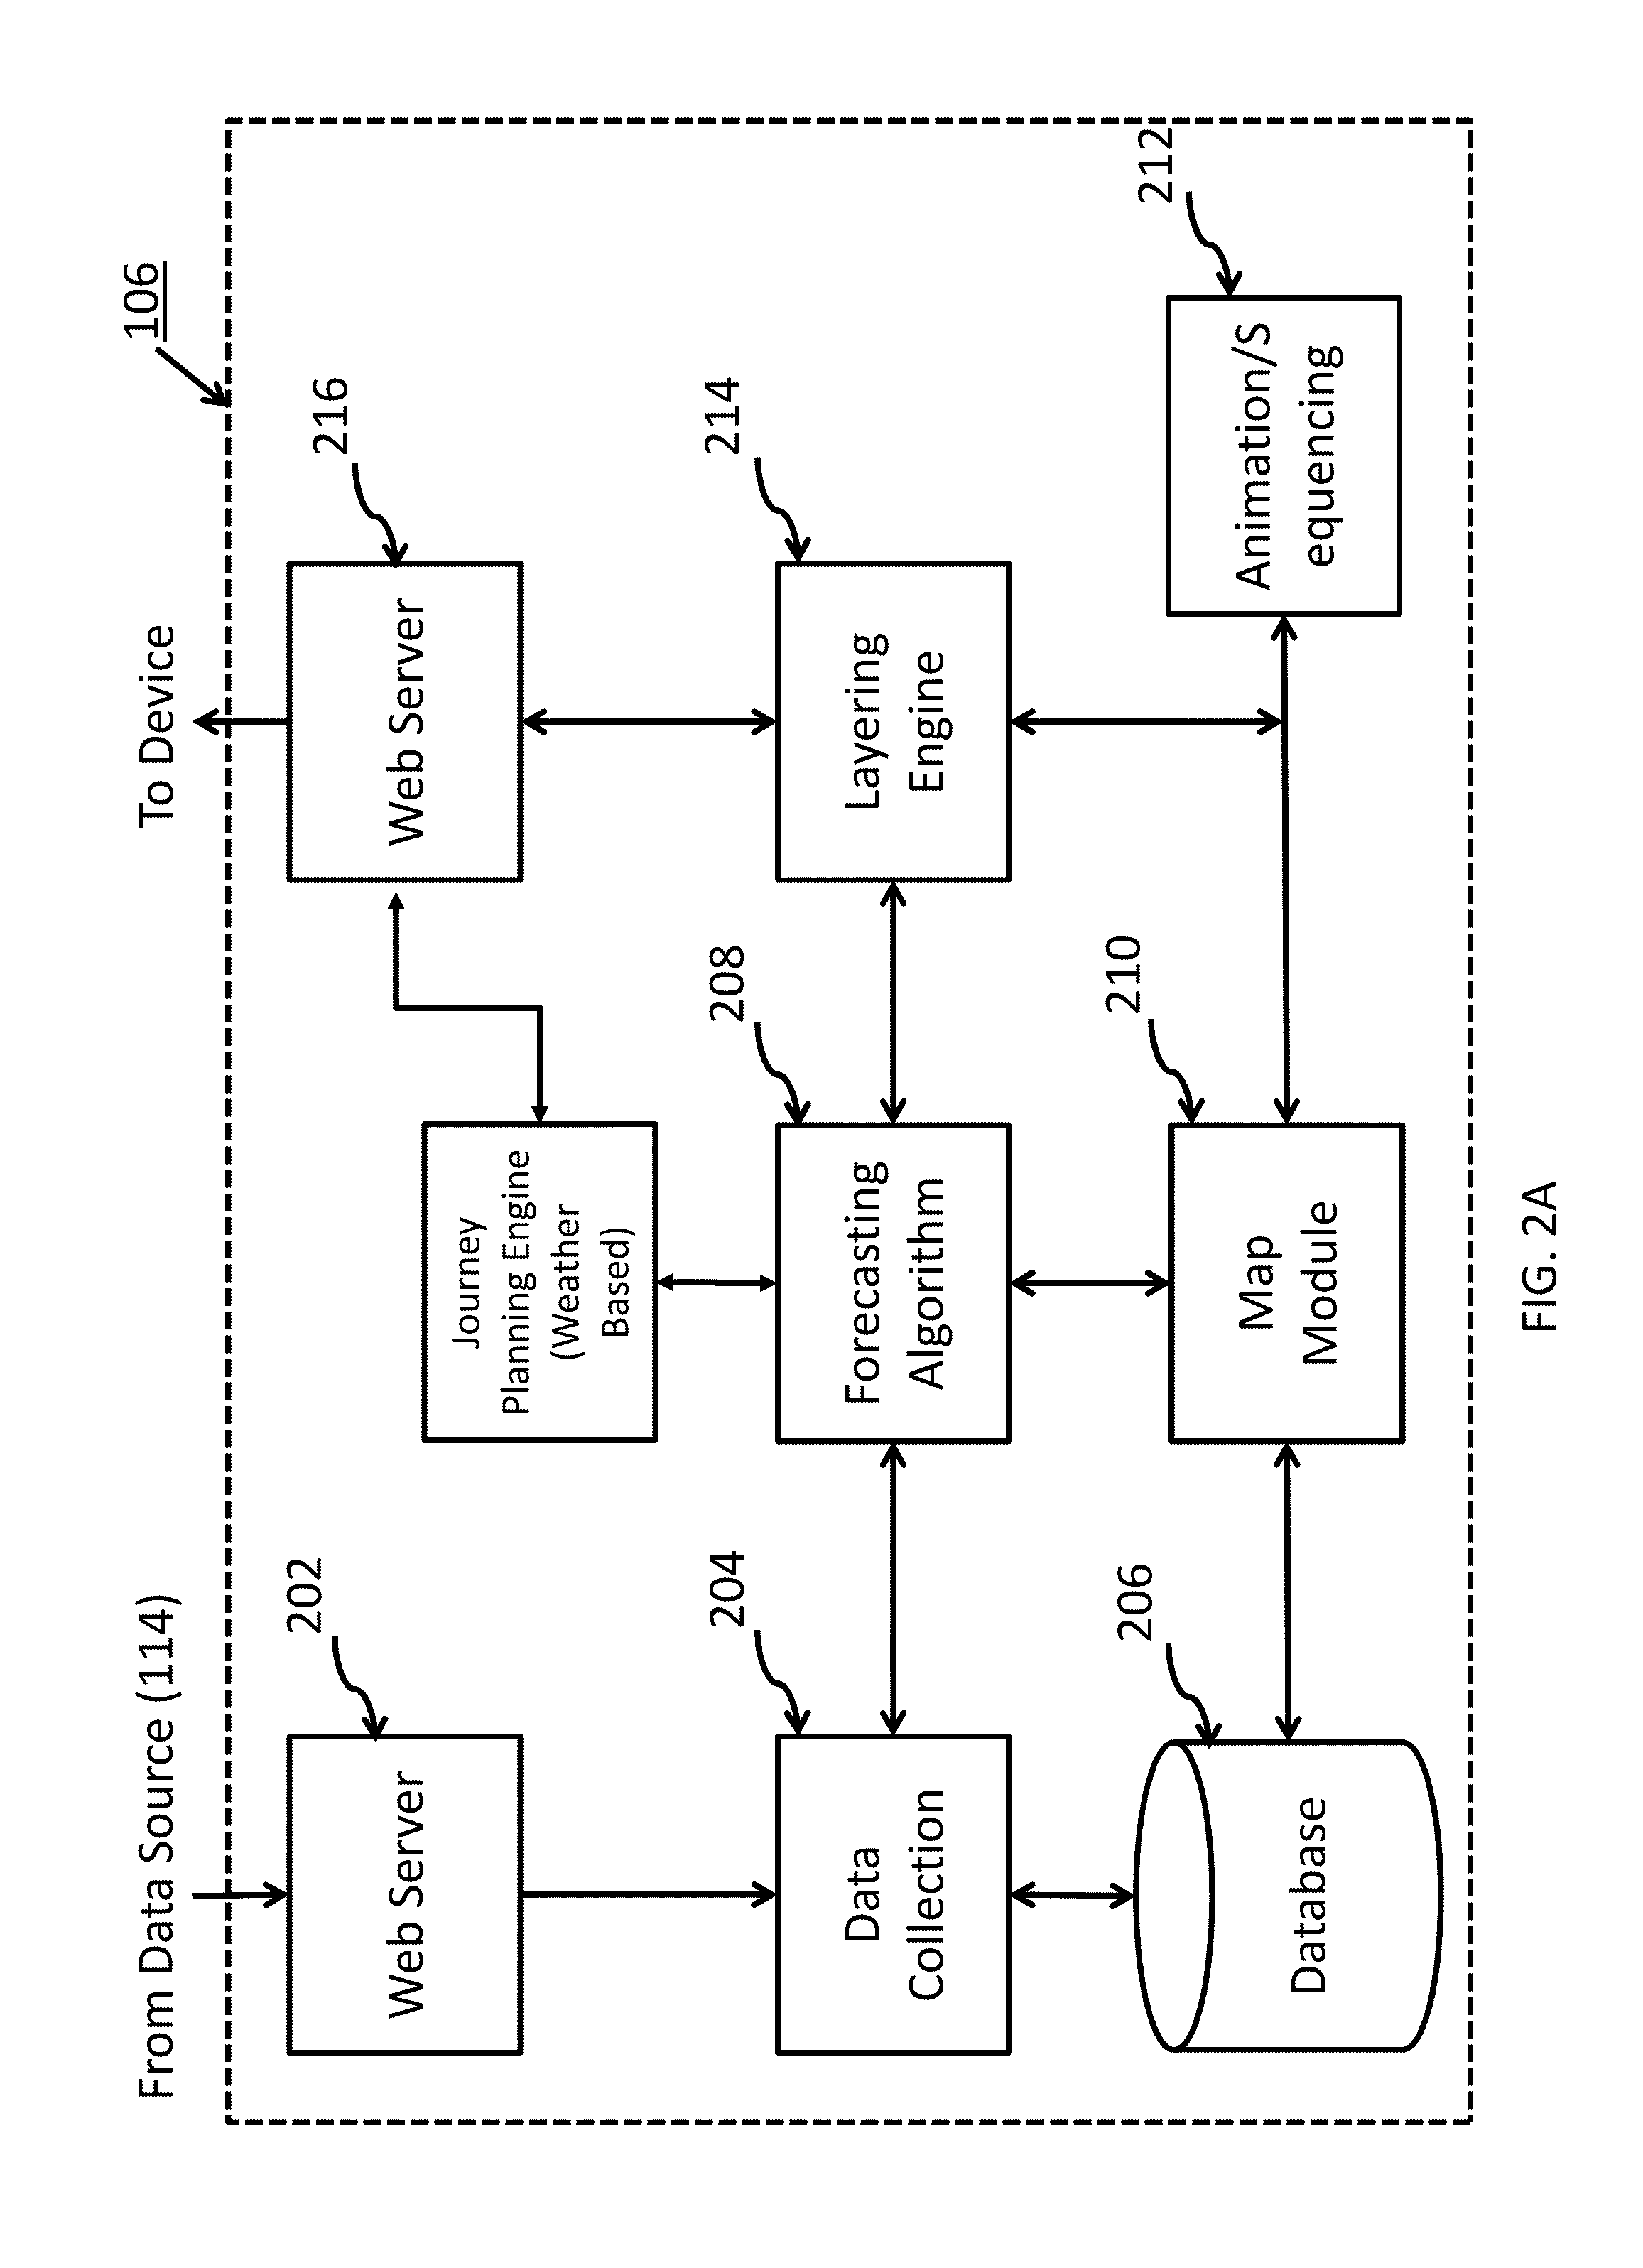 Driving direction based on weather forecasting system and method